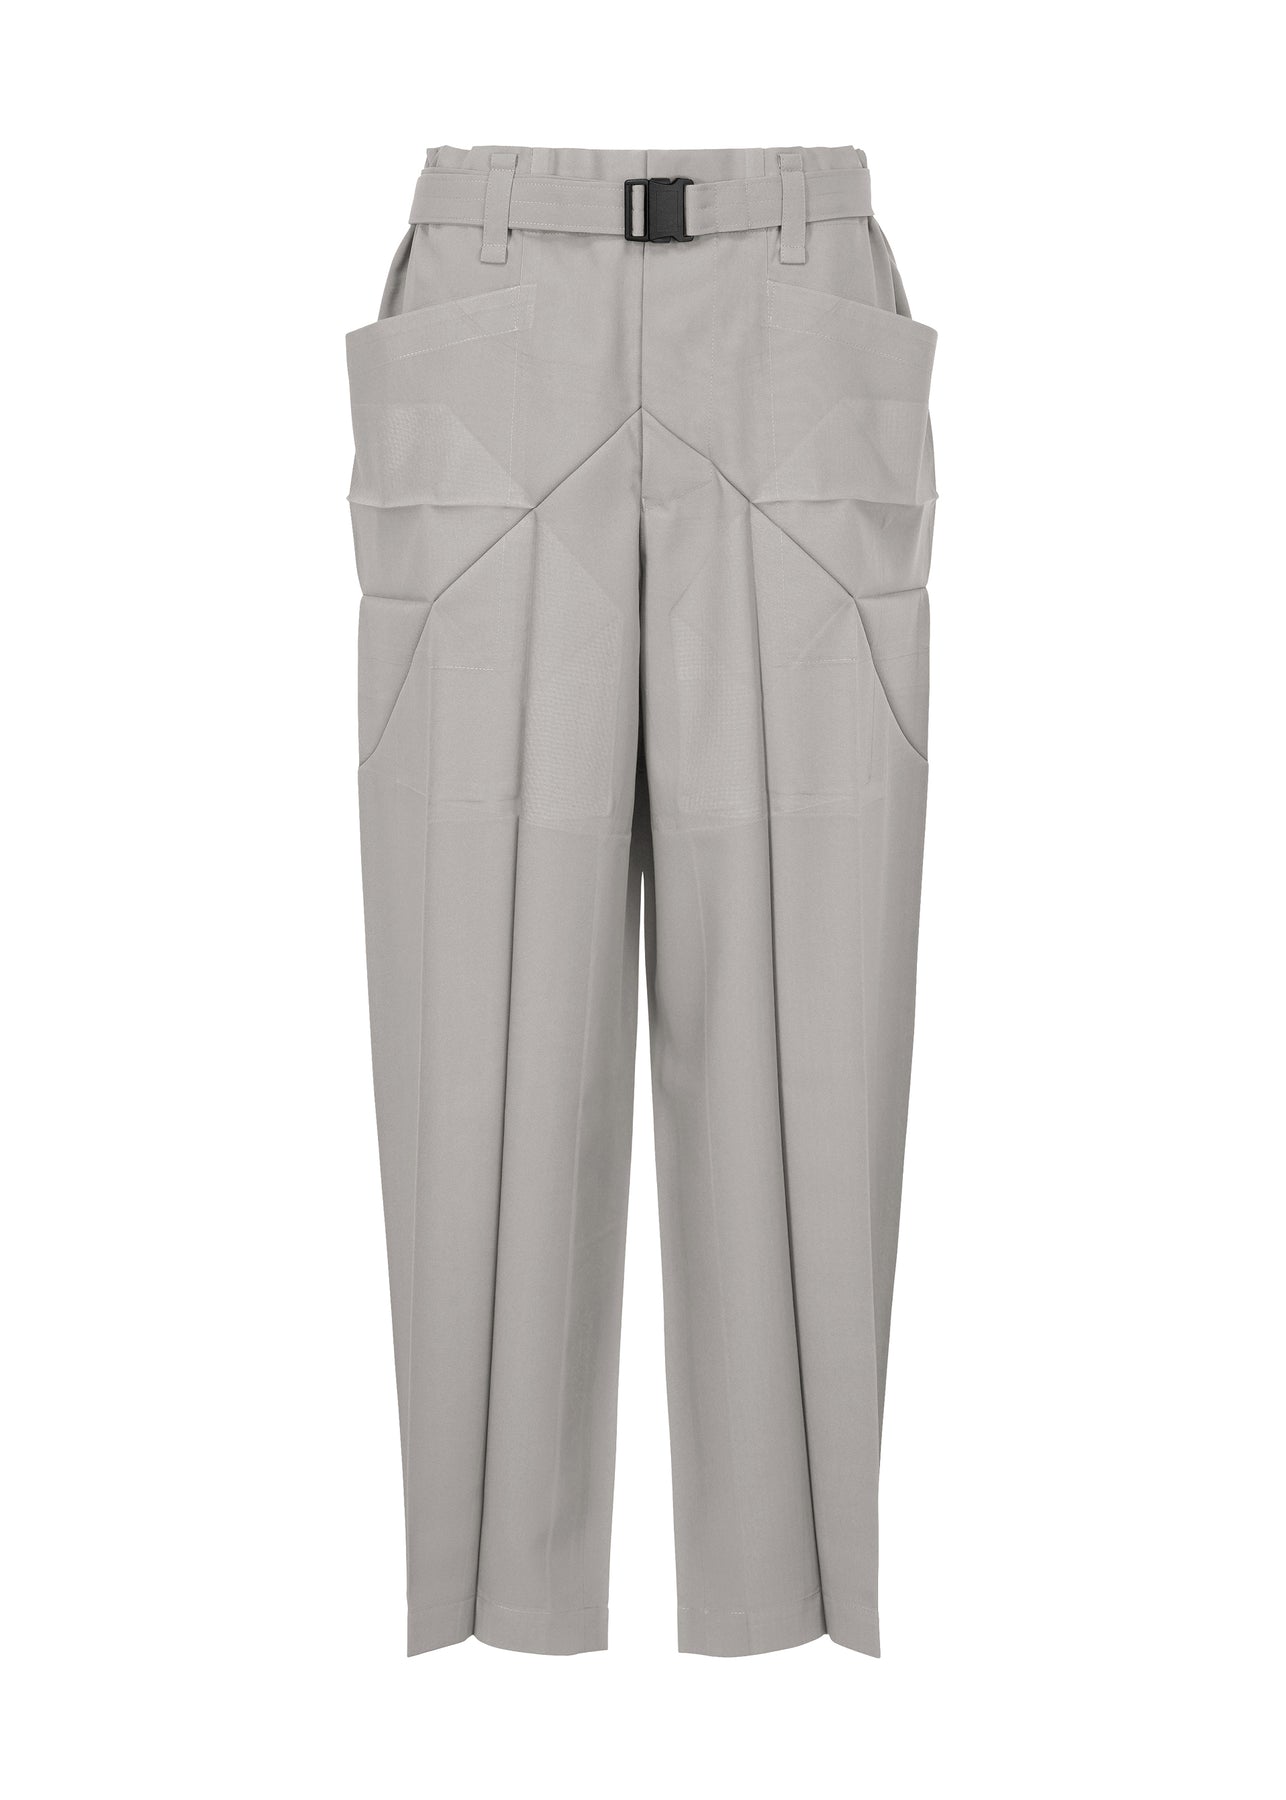 EDGE BOTTOMS PANTS   The official ISSEY MIYAKE ONLINE STORE